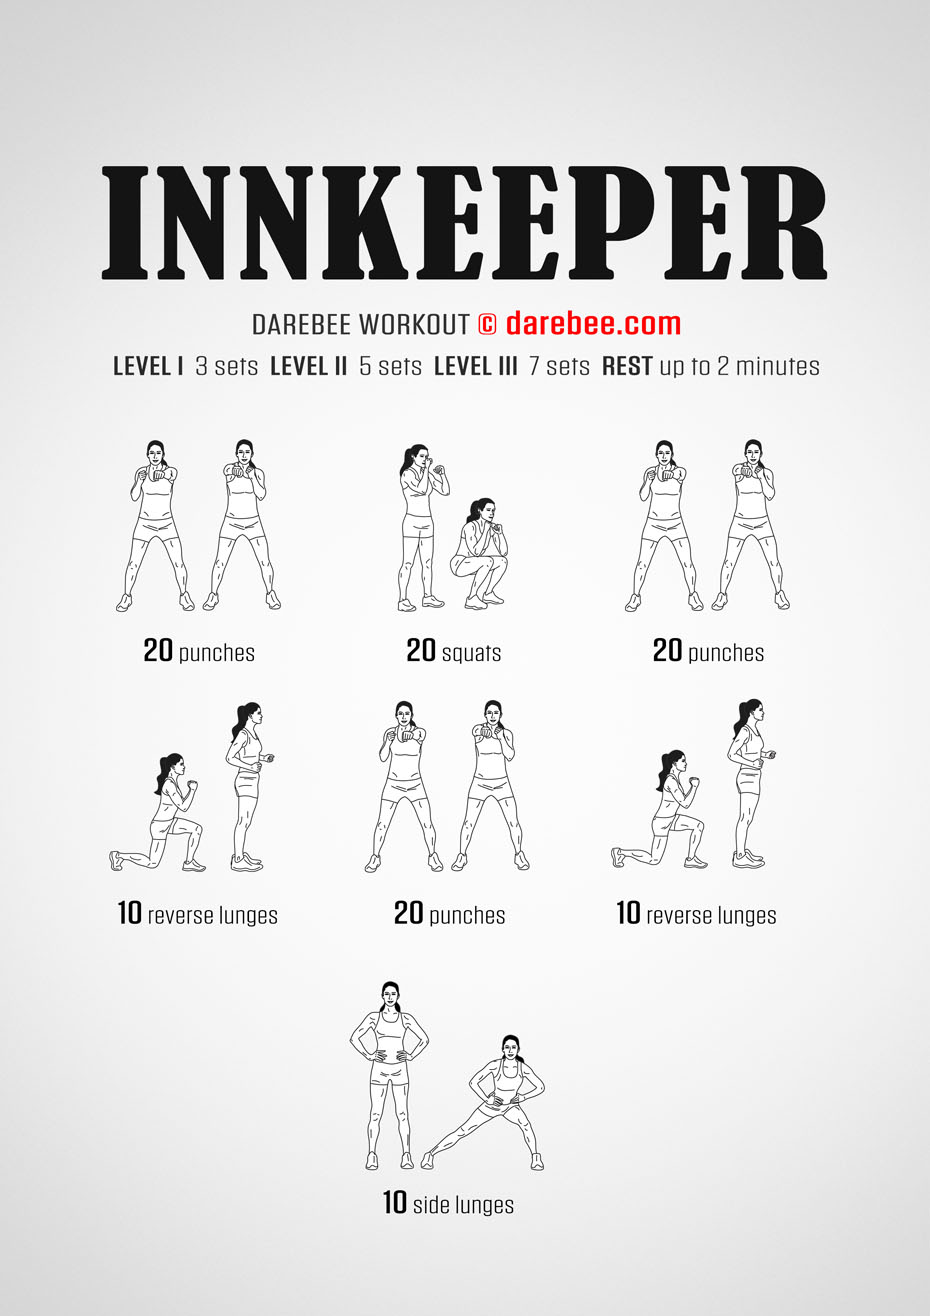 Inkeeper is a Darebee home fitness, strength workout that takes you through some basic body-honing exercises with a specific focus to help you maintain strength and muscle tone.